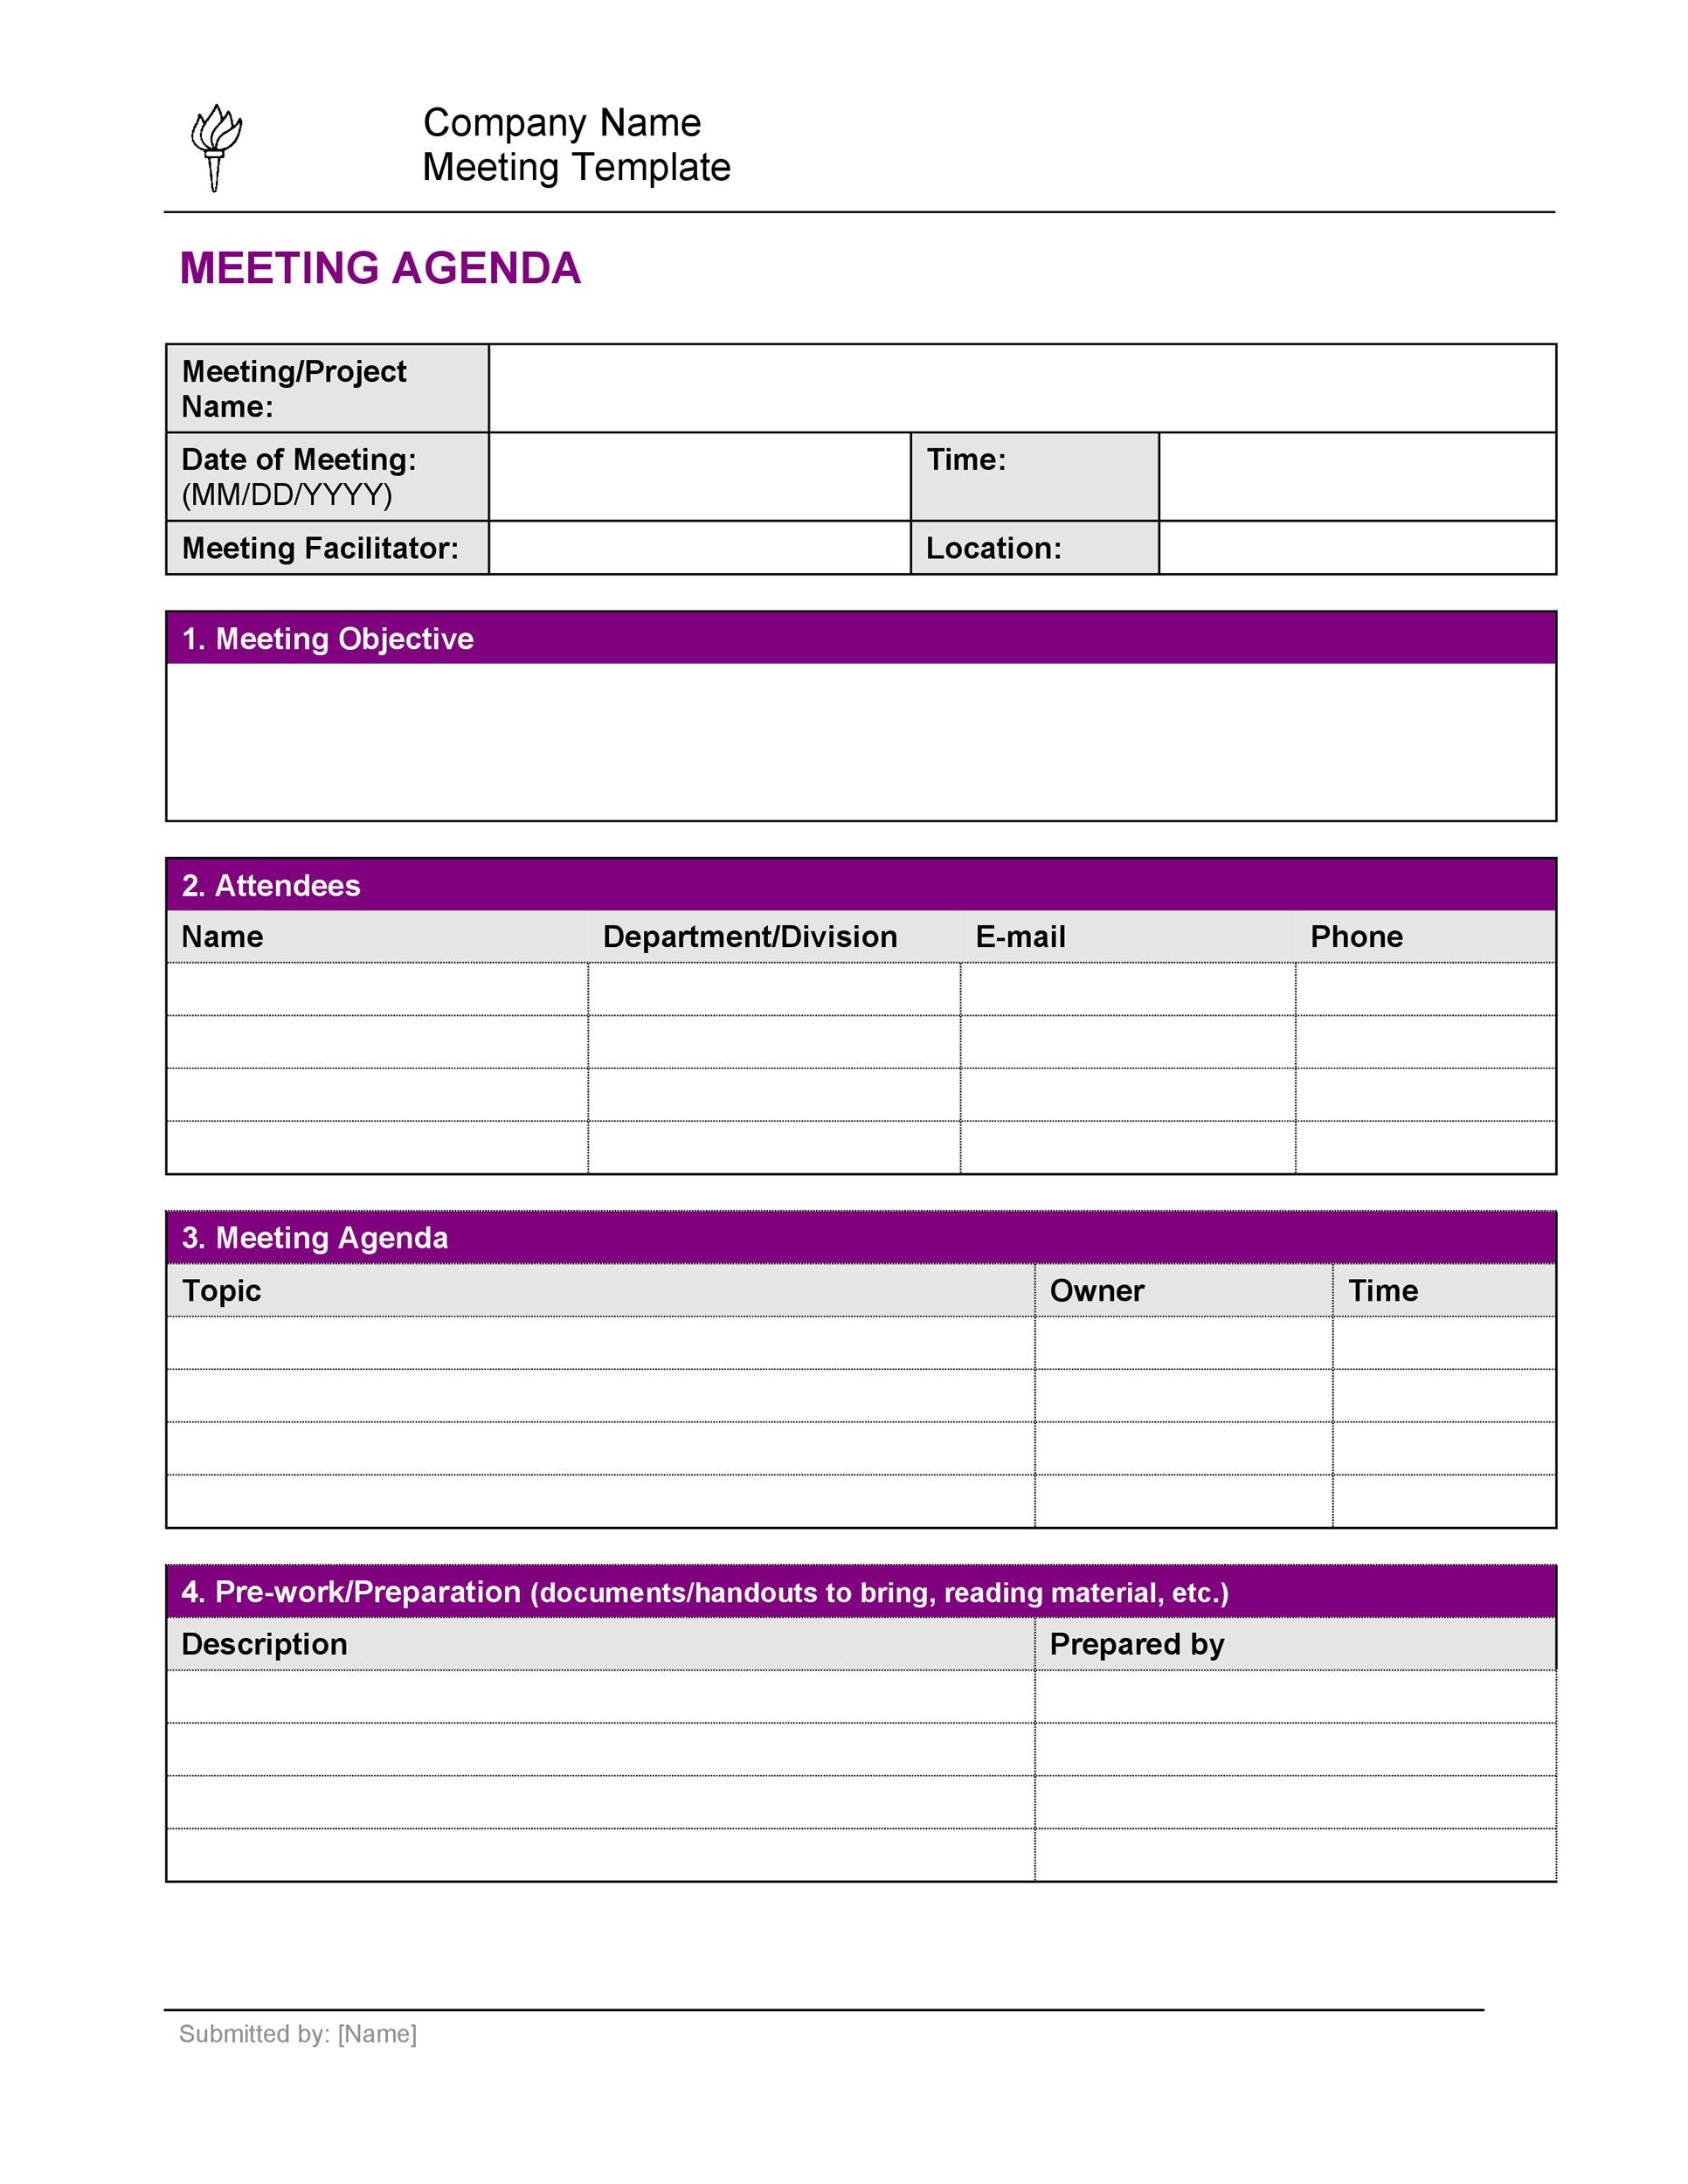 one-on-one-meeting-agenda-template-professional-template-for-business